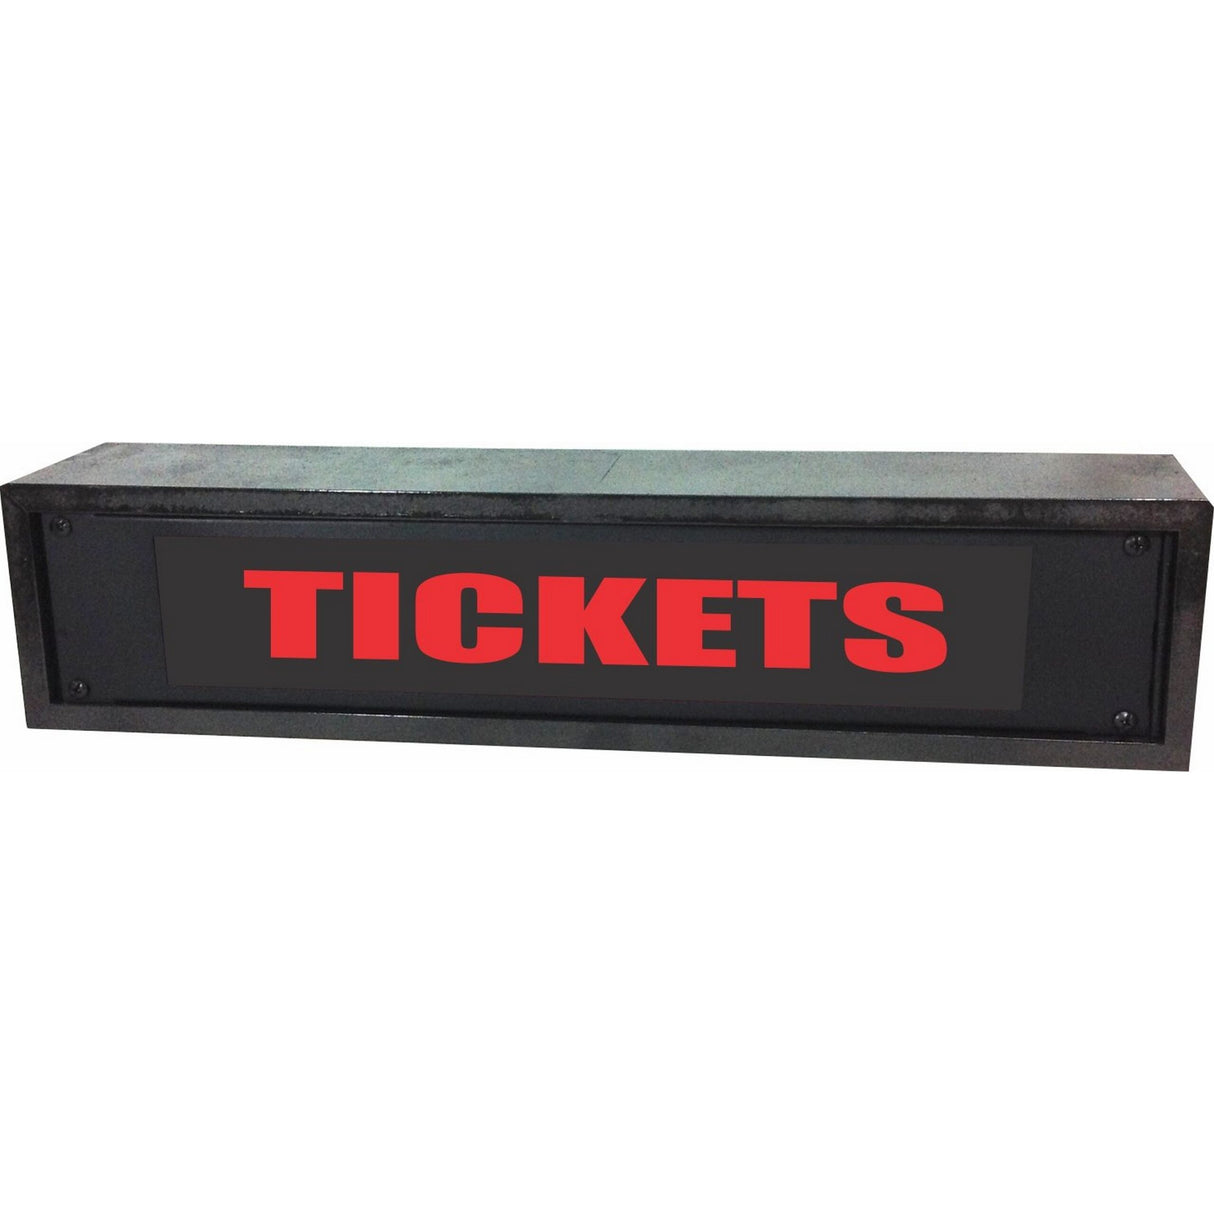 American Recorder OAS-4055RD "TICKETS" 2U Rackmount LED Lighted Sign with Enclosure, Red